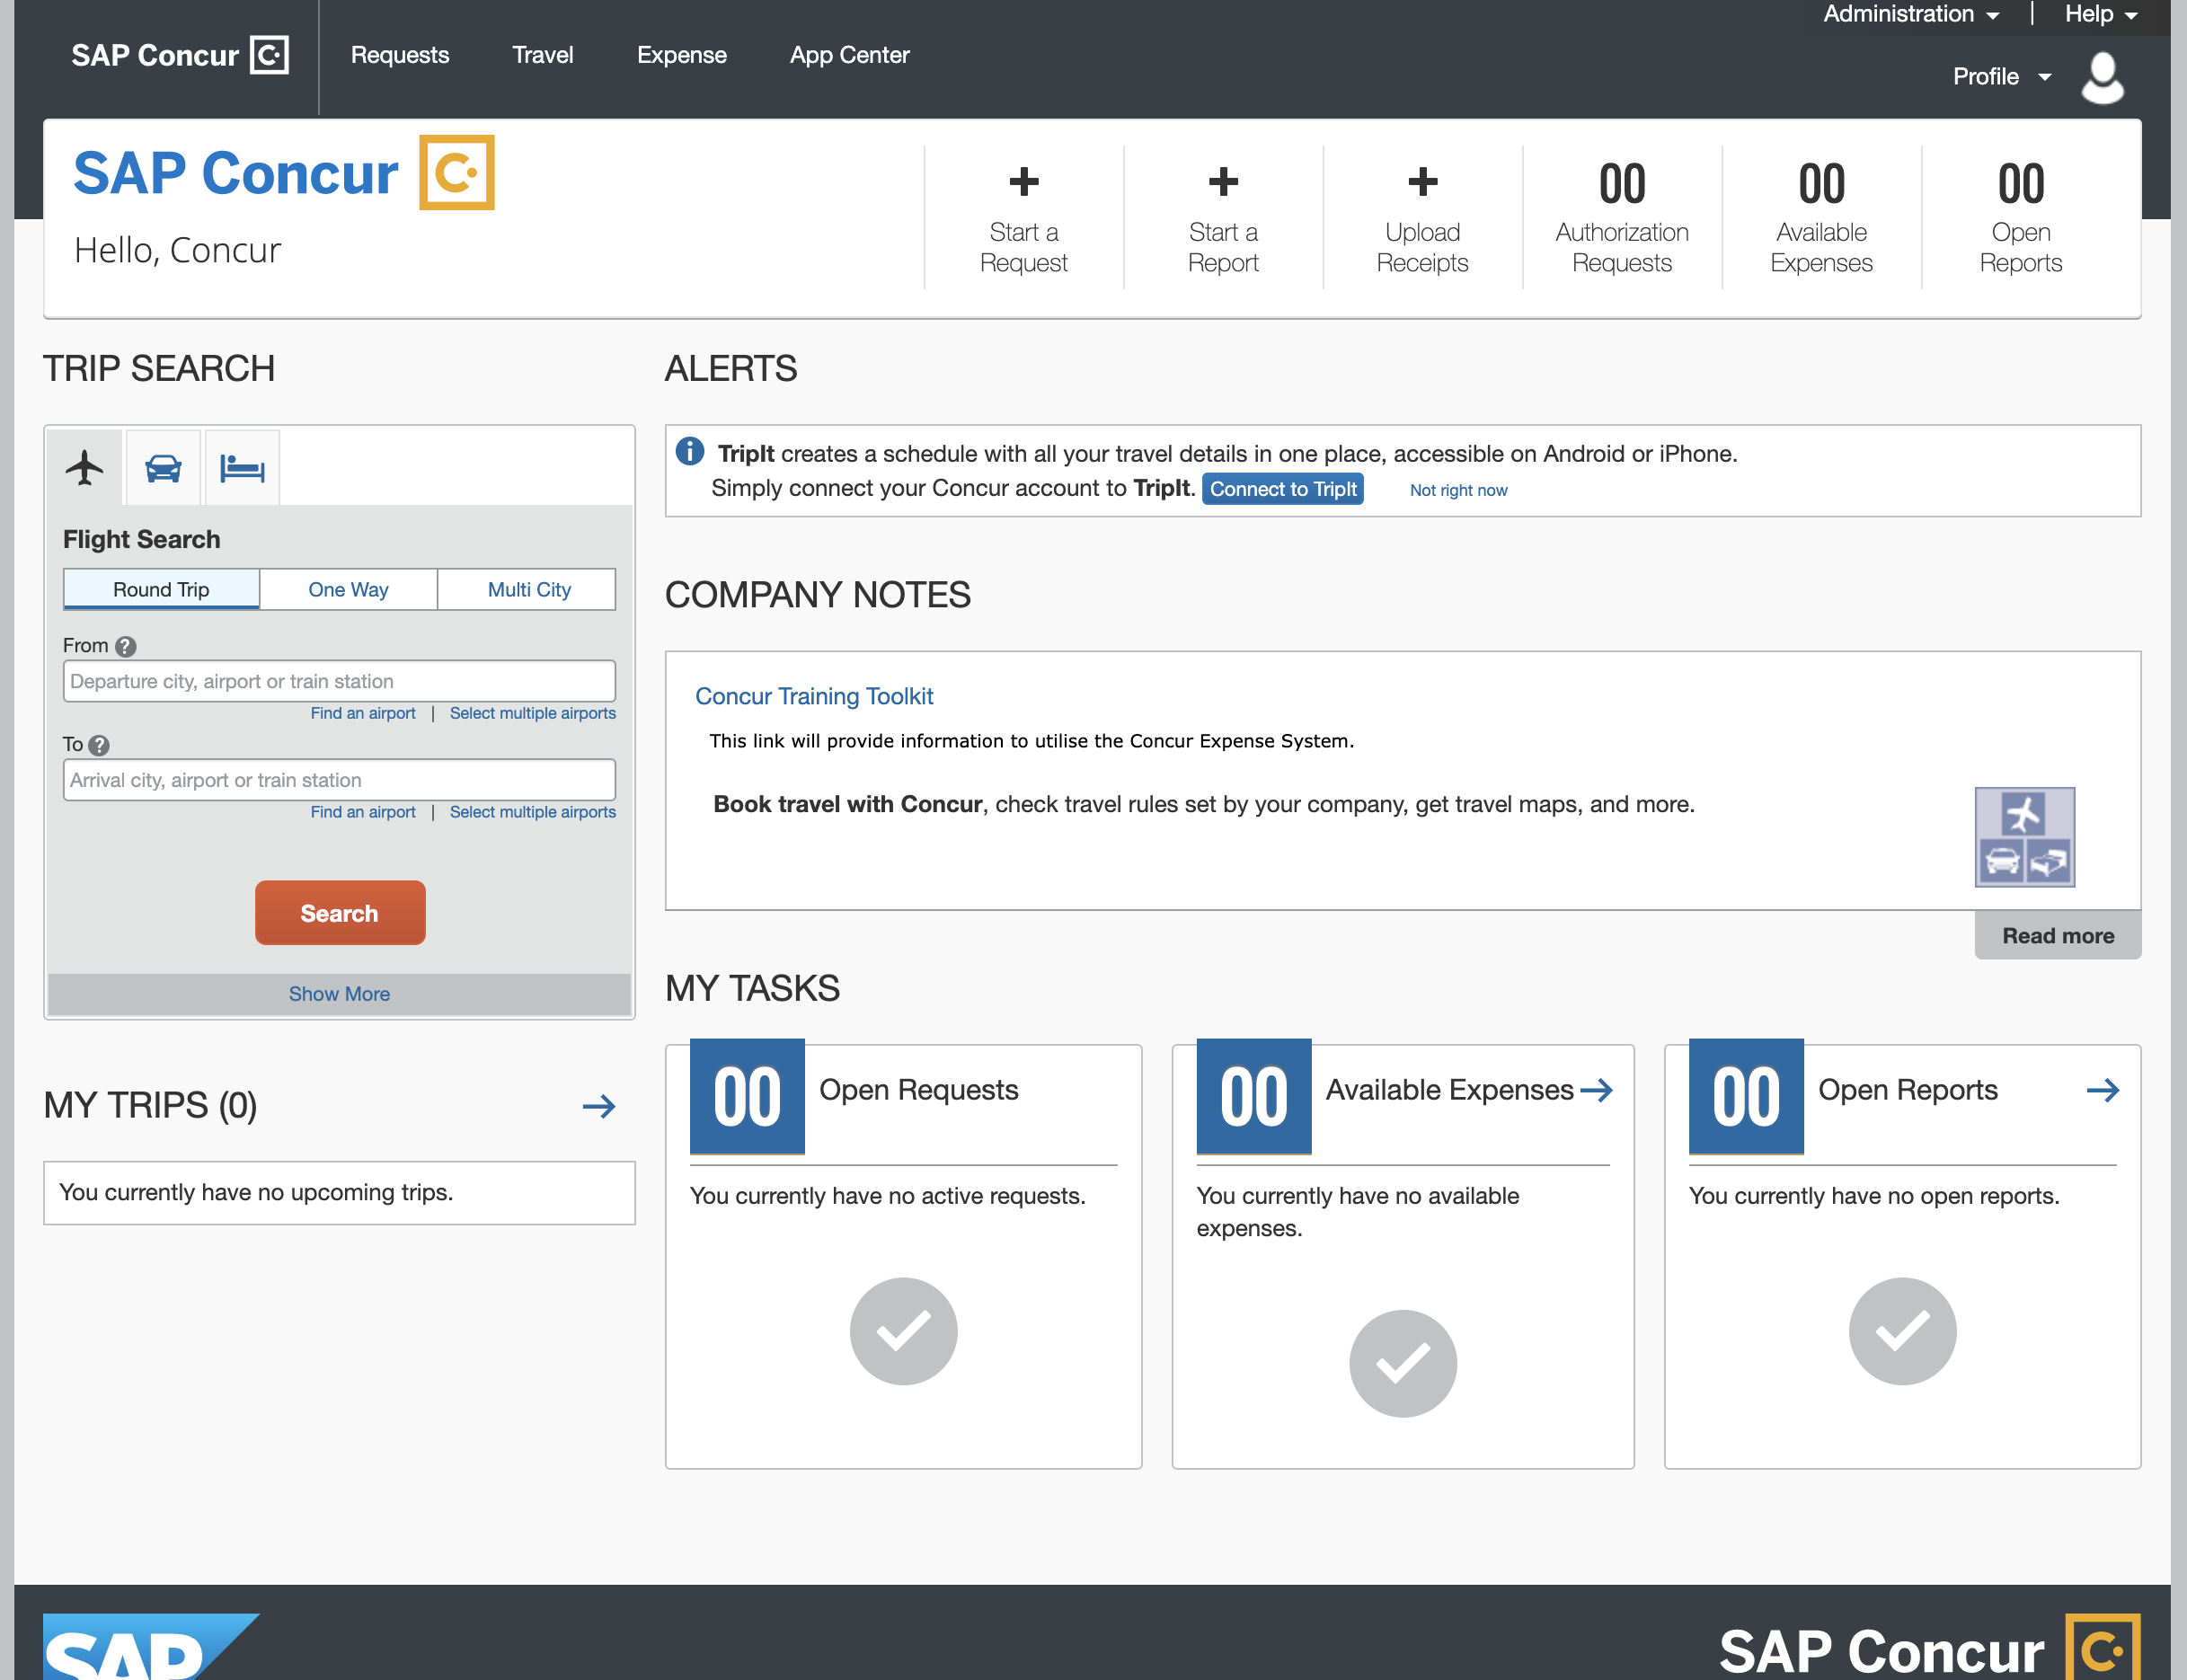 SAP Concur page after log in